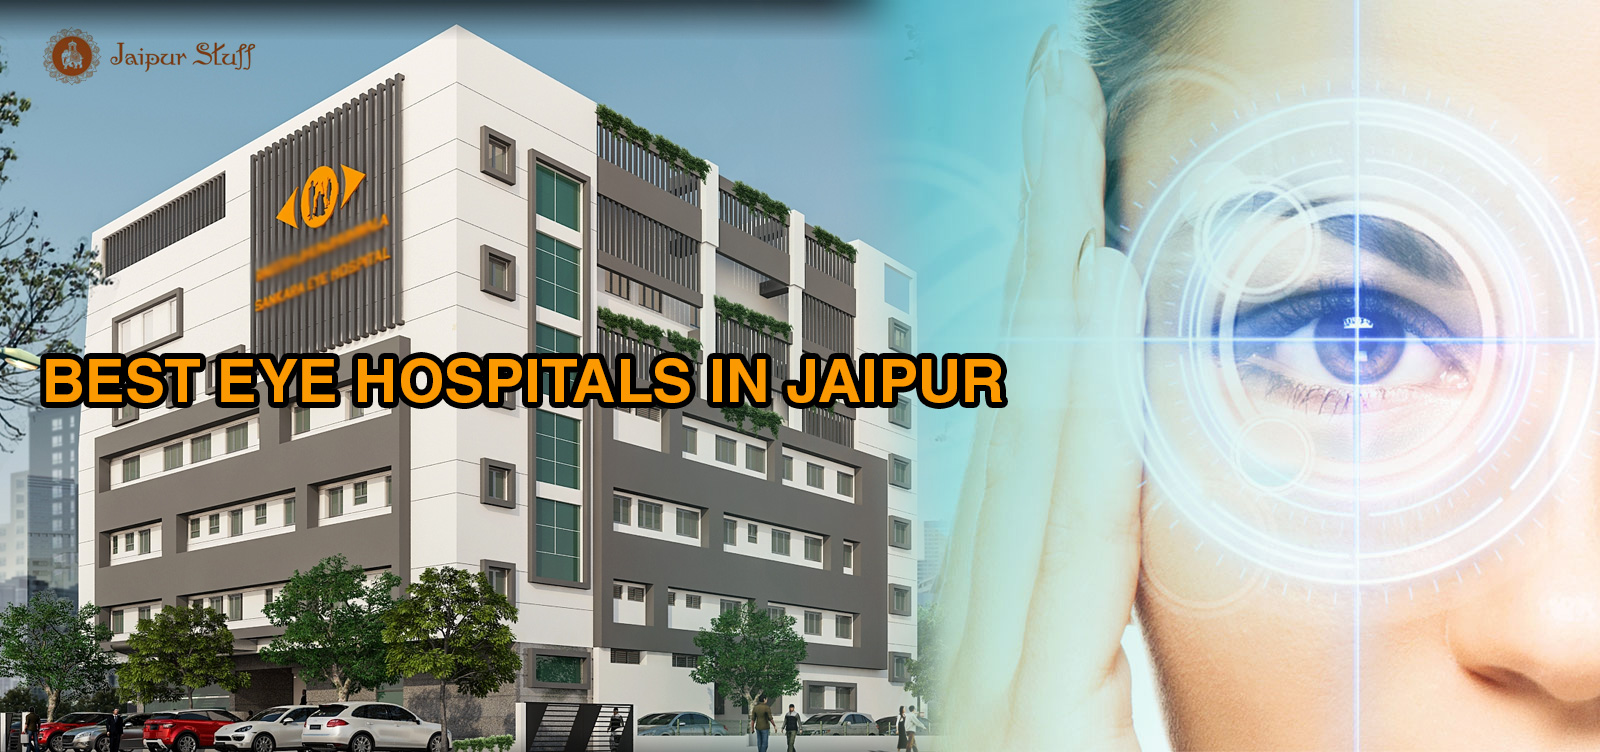 11 best eye hospitals in Jaipur to get quality eye care